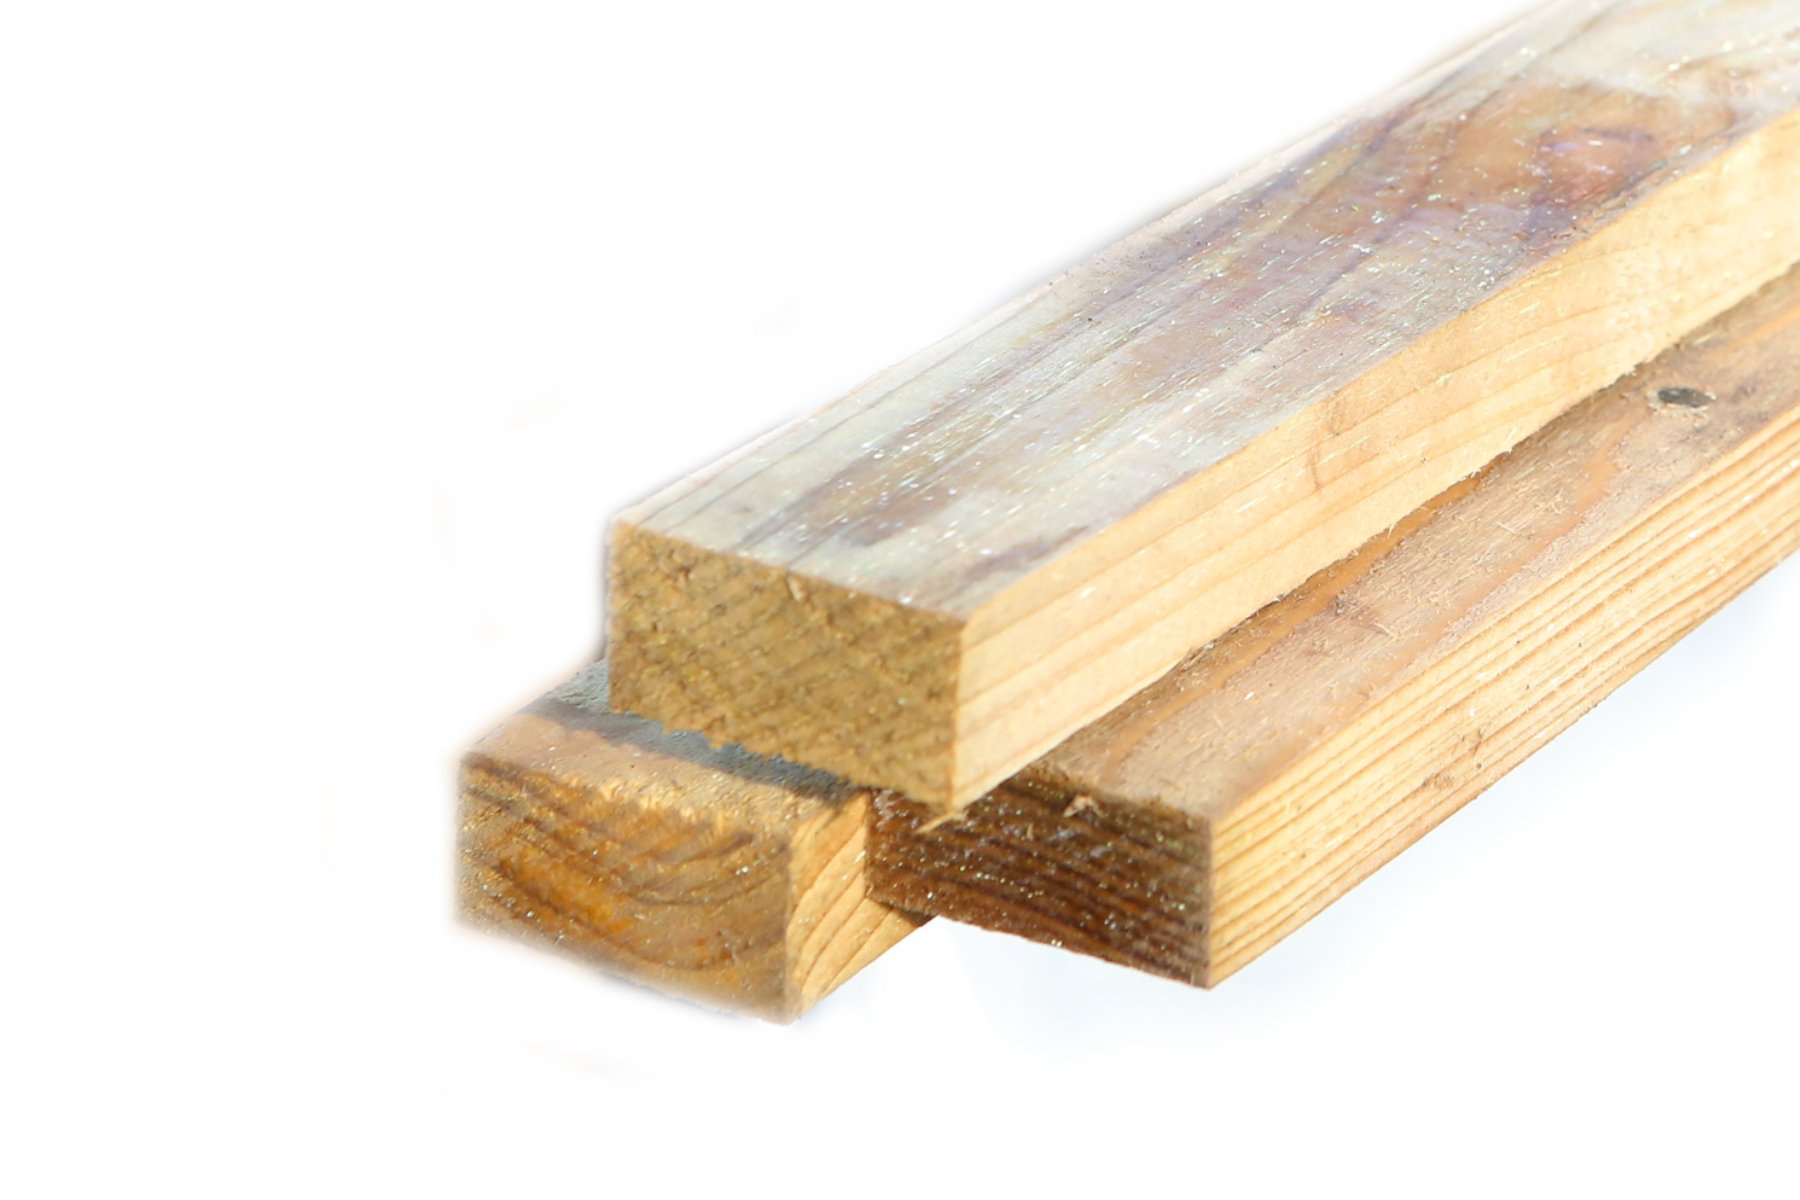 50mm x 25mm Timber